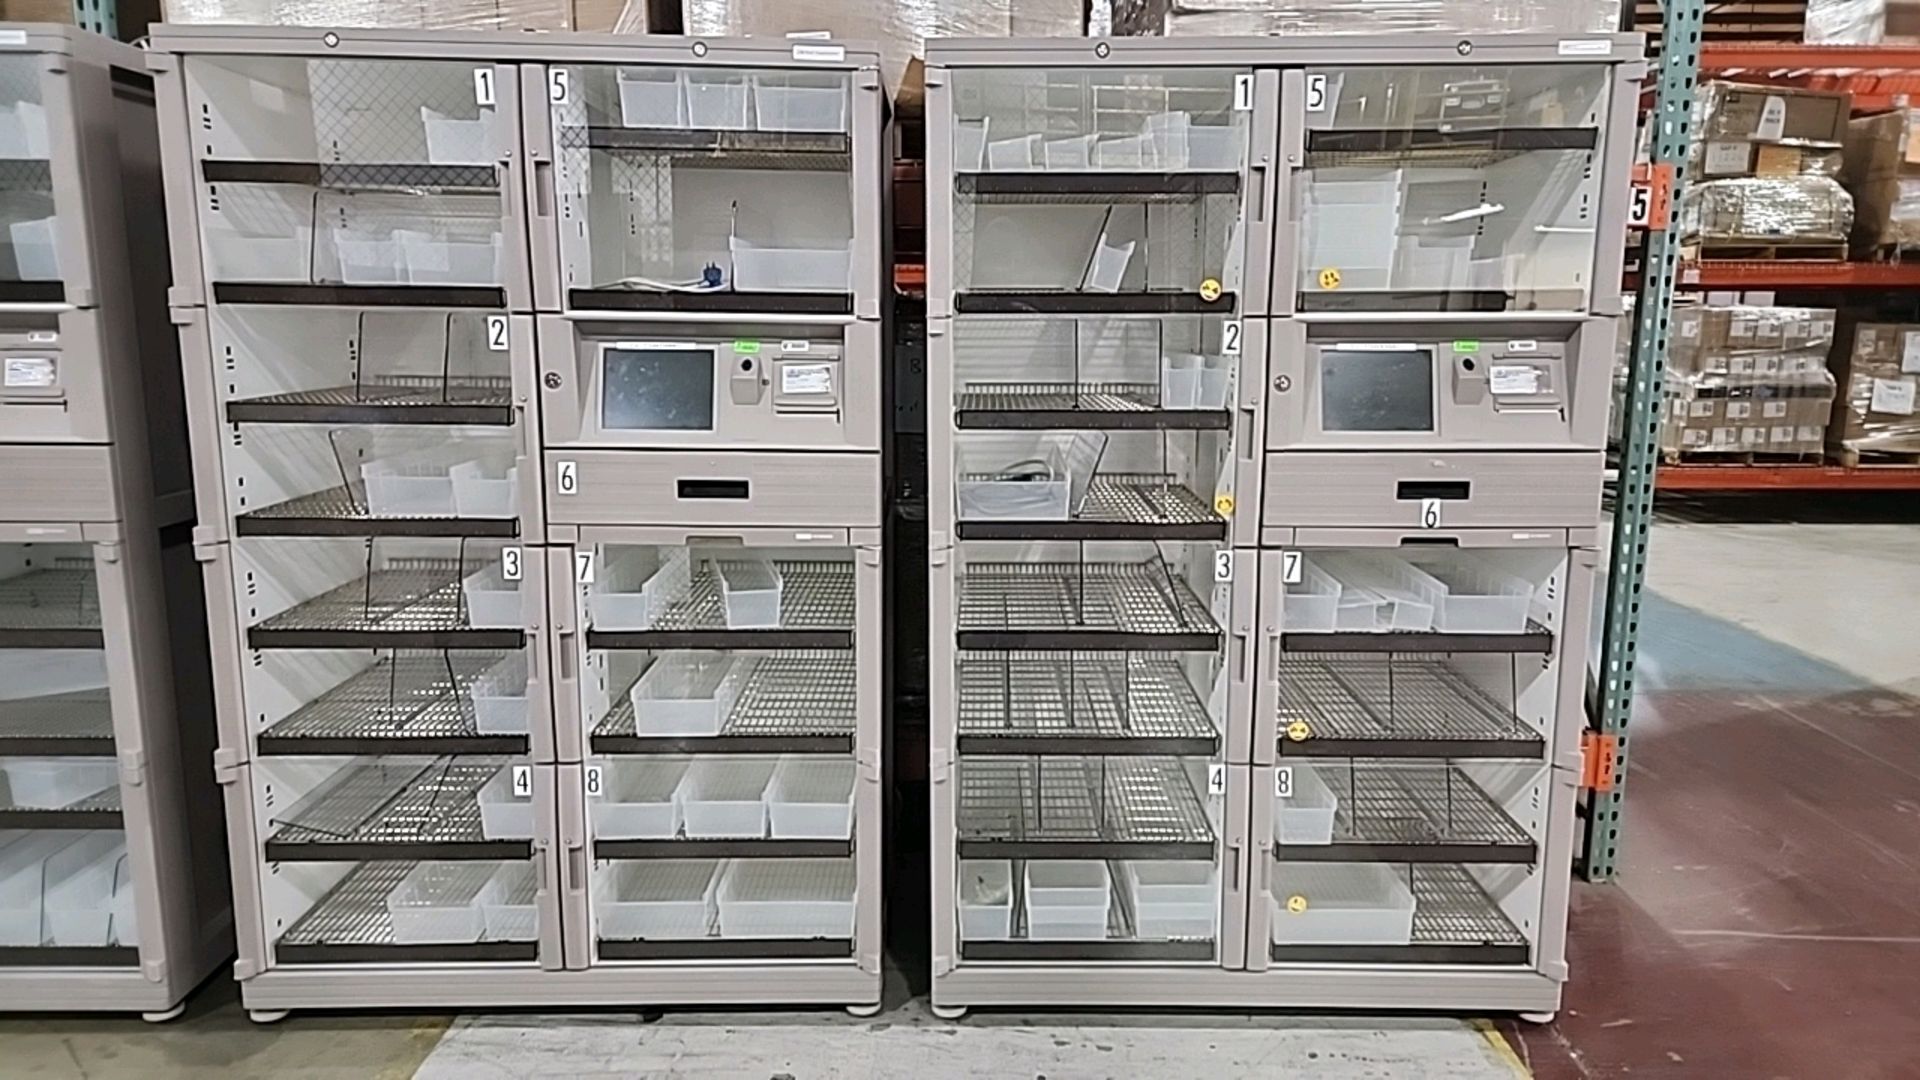 BD PYXIS 347 UNIVERSAL 601 SUPPLY CABINET, 2-DOOR, QTY(2) LOCATION: 100 GOLDEN DR. CODE: 217